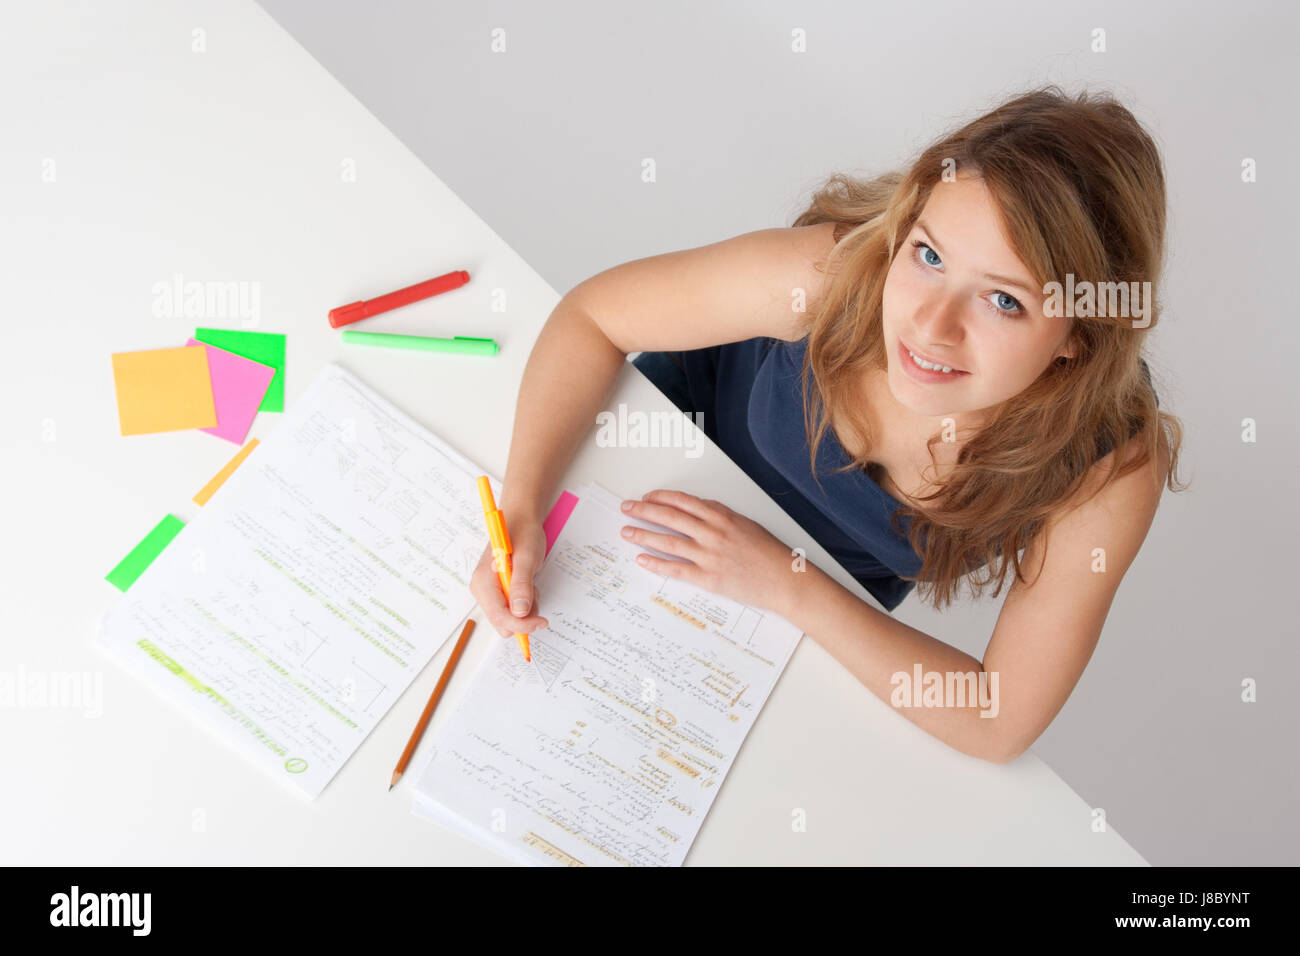 study, student, intellectual, egghead, woman, blue, laugh, laughs, laughing, Stock Photo